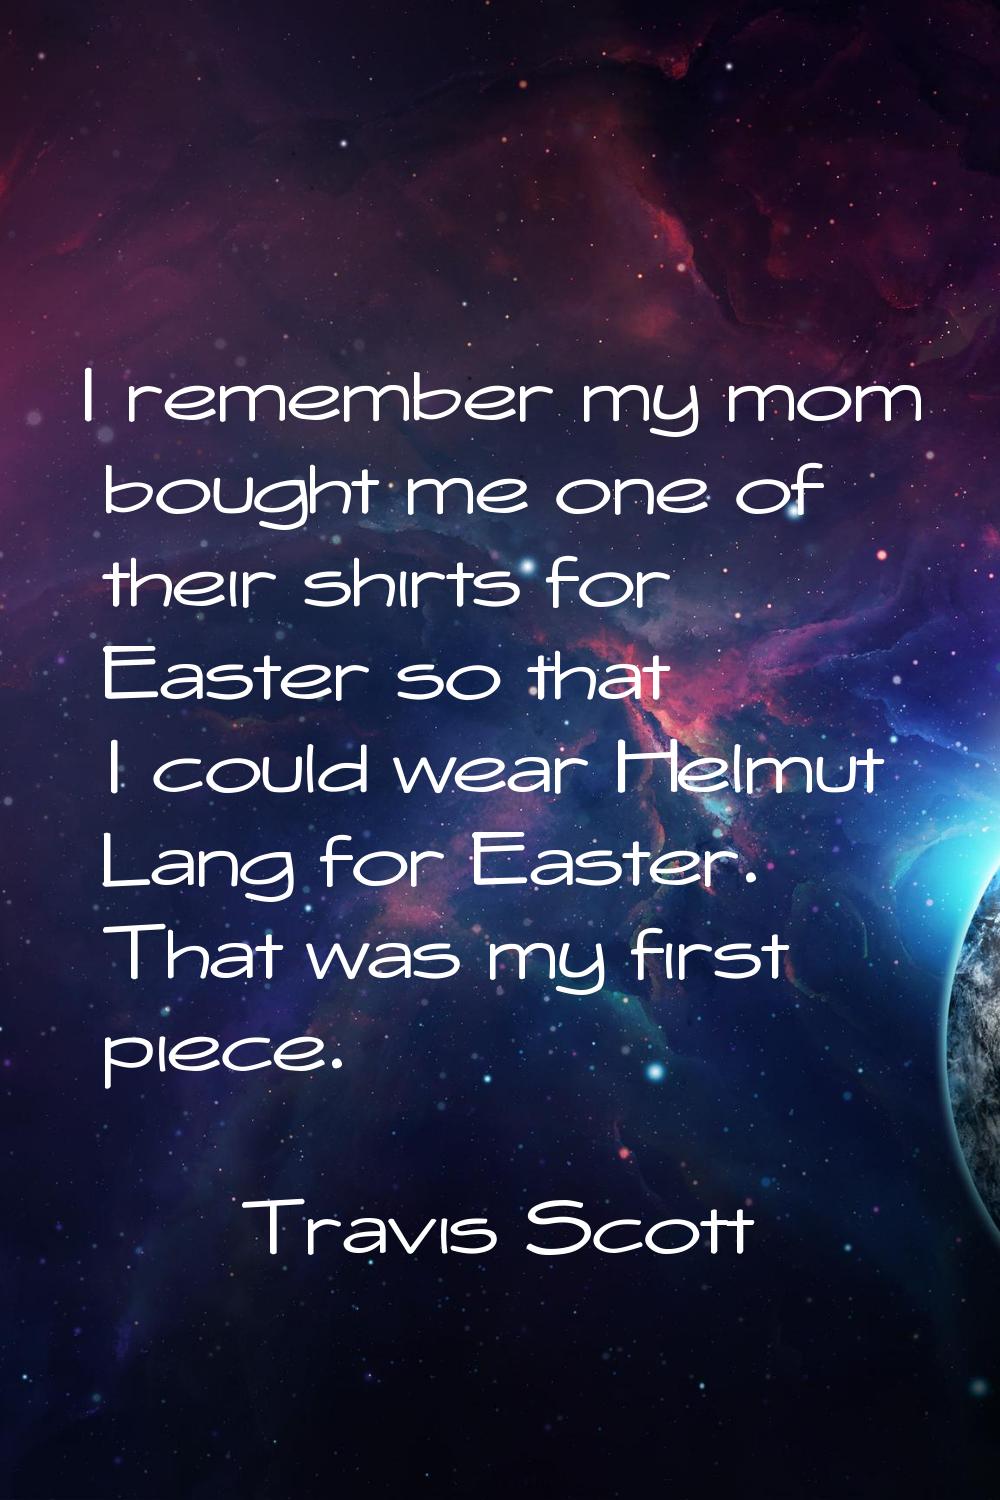 I remember my mom bought me one of their shirts for Easter so that I could wear Helmut Lang for Eas